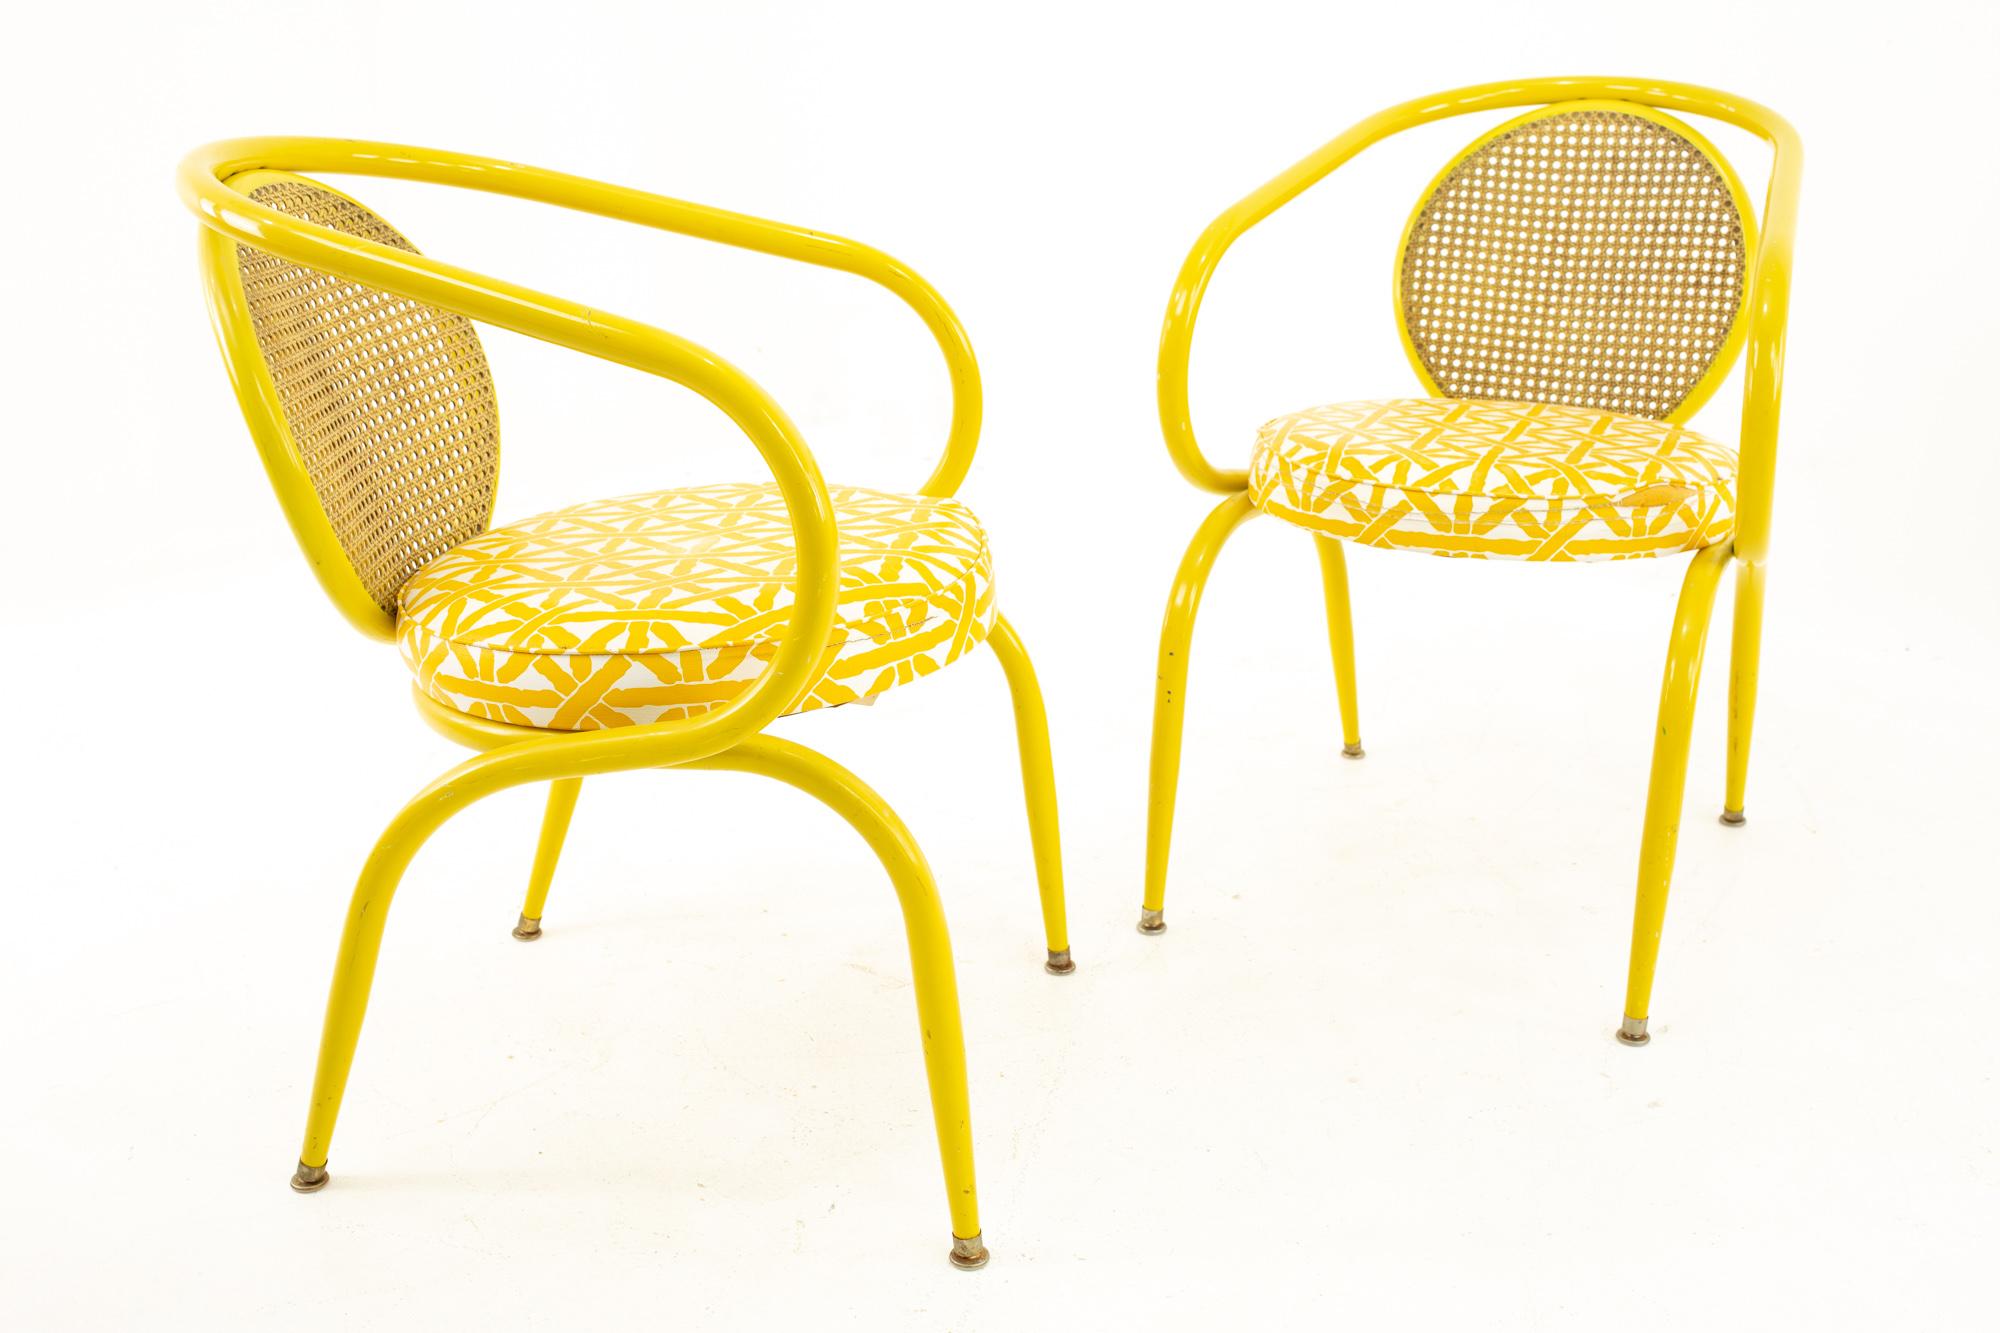 Howell Mid Century yellow chairs, pair
Each chair measures: 21 wide x 23 deep x 30 high with a seat height of 18 inches

This price includes getting this set in what we call restored vintage condition. Upon purchase it is fixed so it’s free of